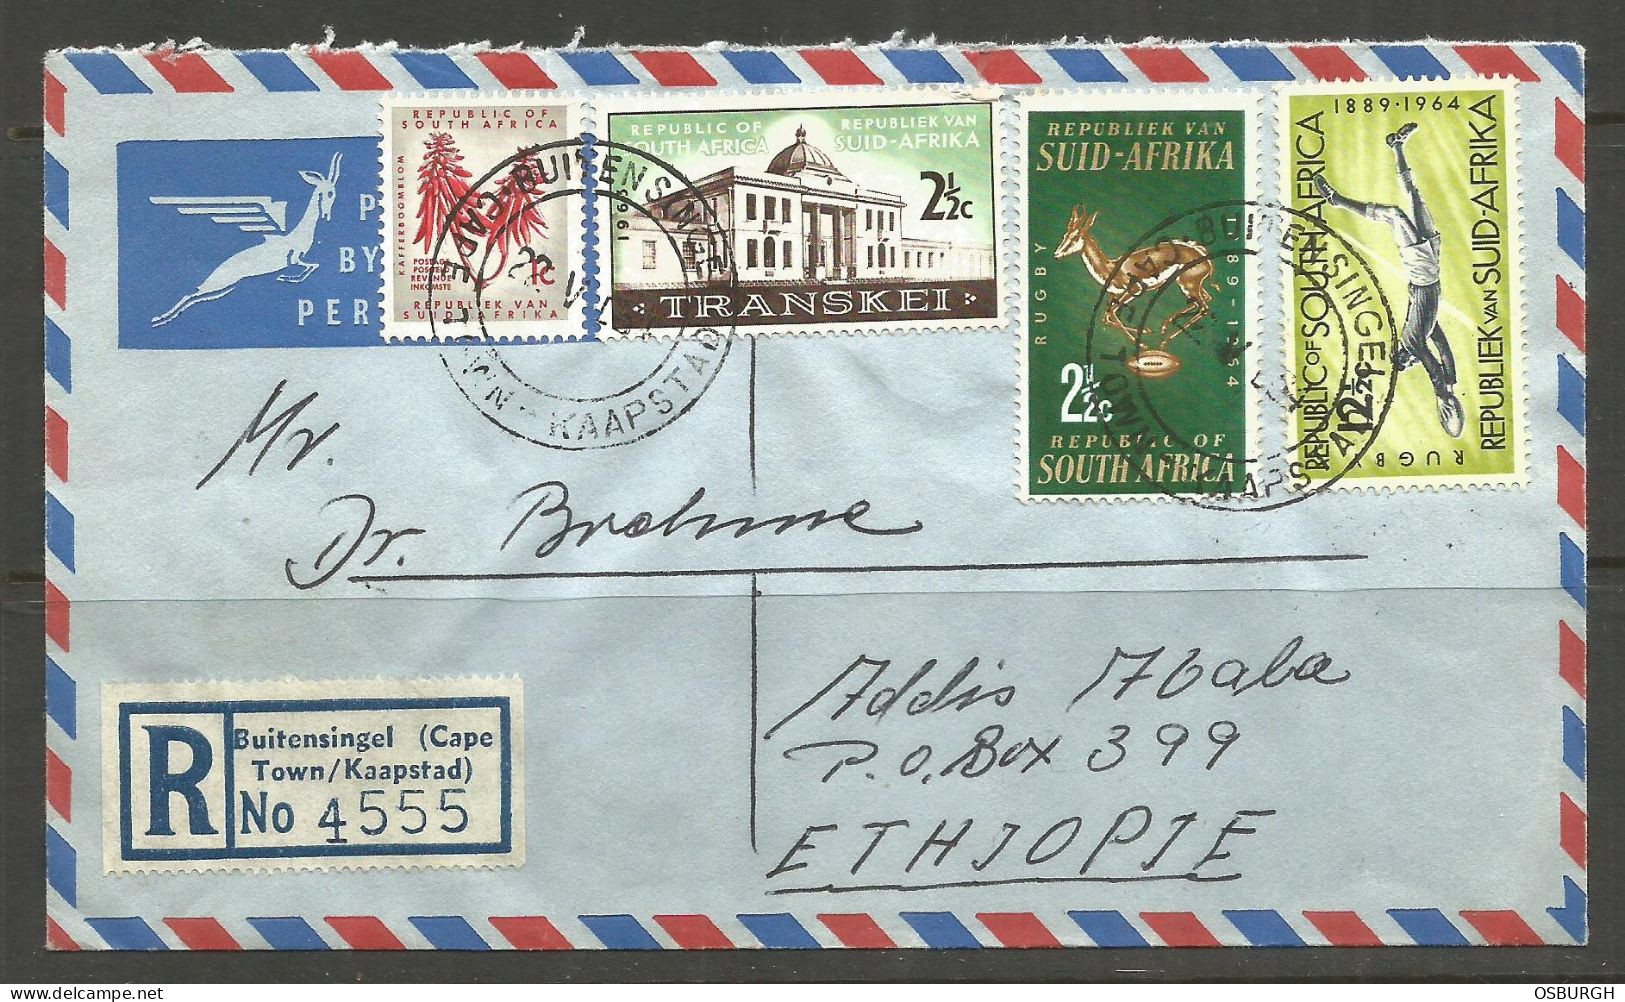 SOUTH AFRICA / ETHIOPIA. 1964. REGISTERED AIR MAIL COVER. CAPE TOWN TO ADDIS ABABA. GERMAN EVANGELICAL LUTHERAN CHURCH - Lettres & Documents